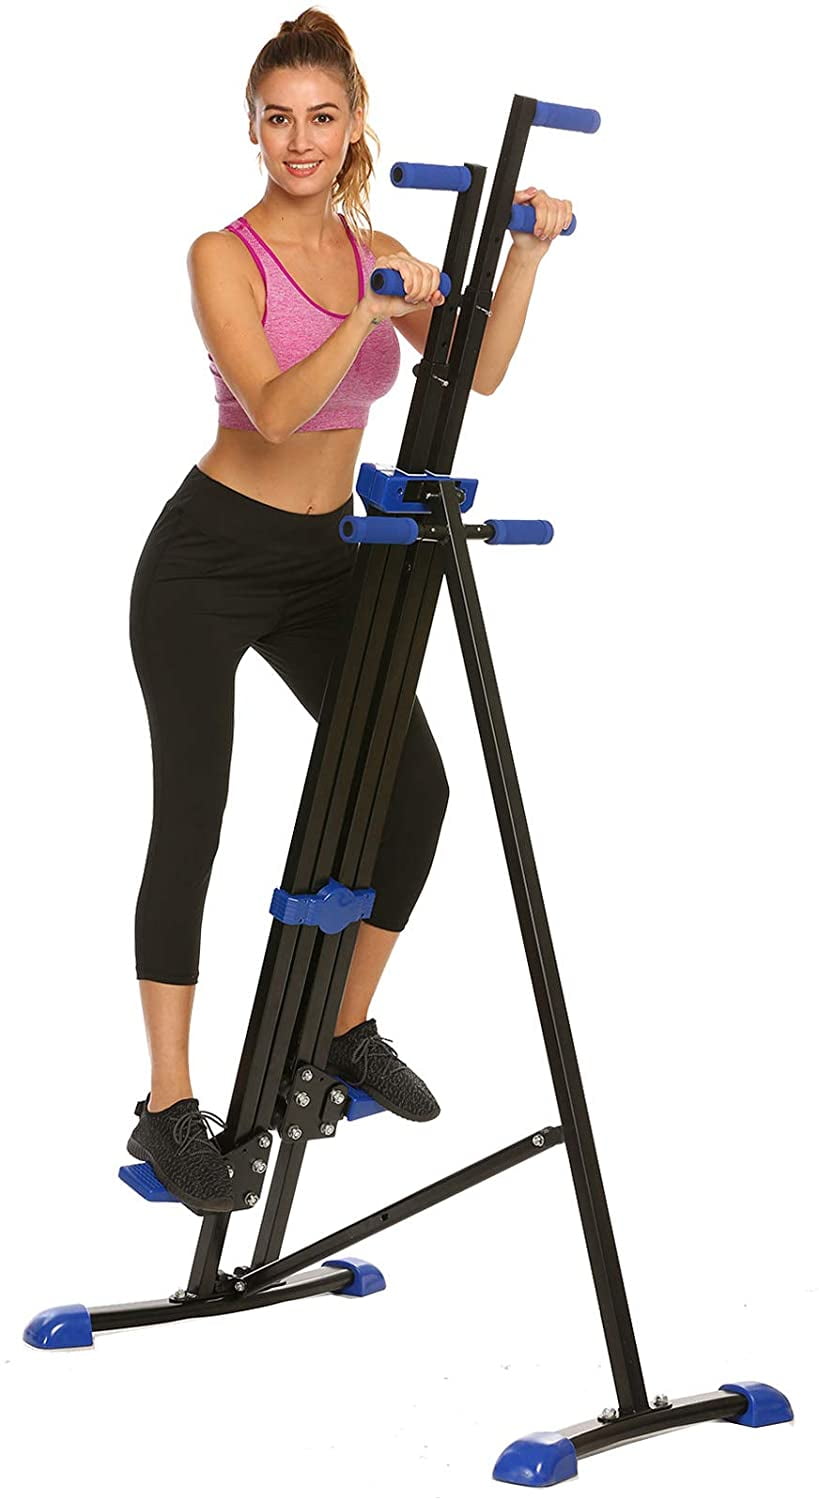 Details about   US Vertical Climber Machine Exercise Stepper Maxi Cardio Workout Fitness Gym FDA 